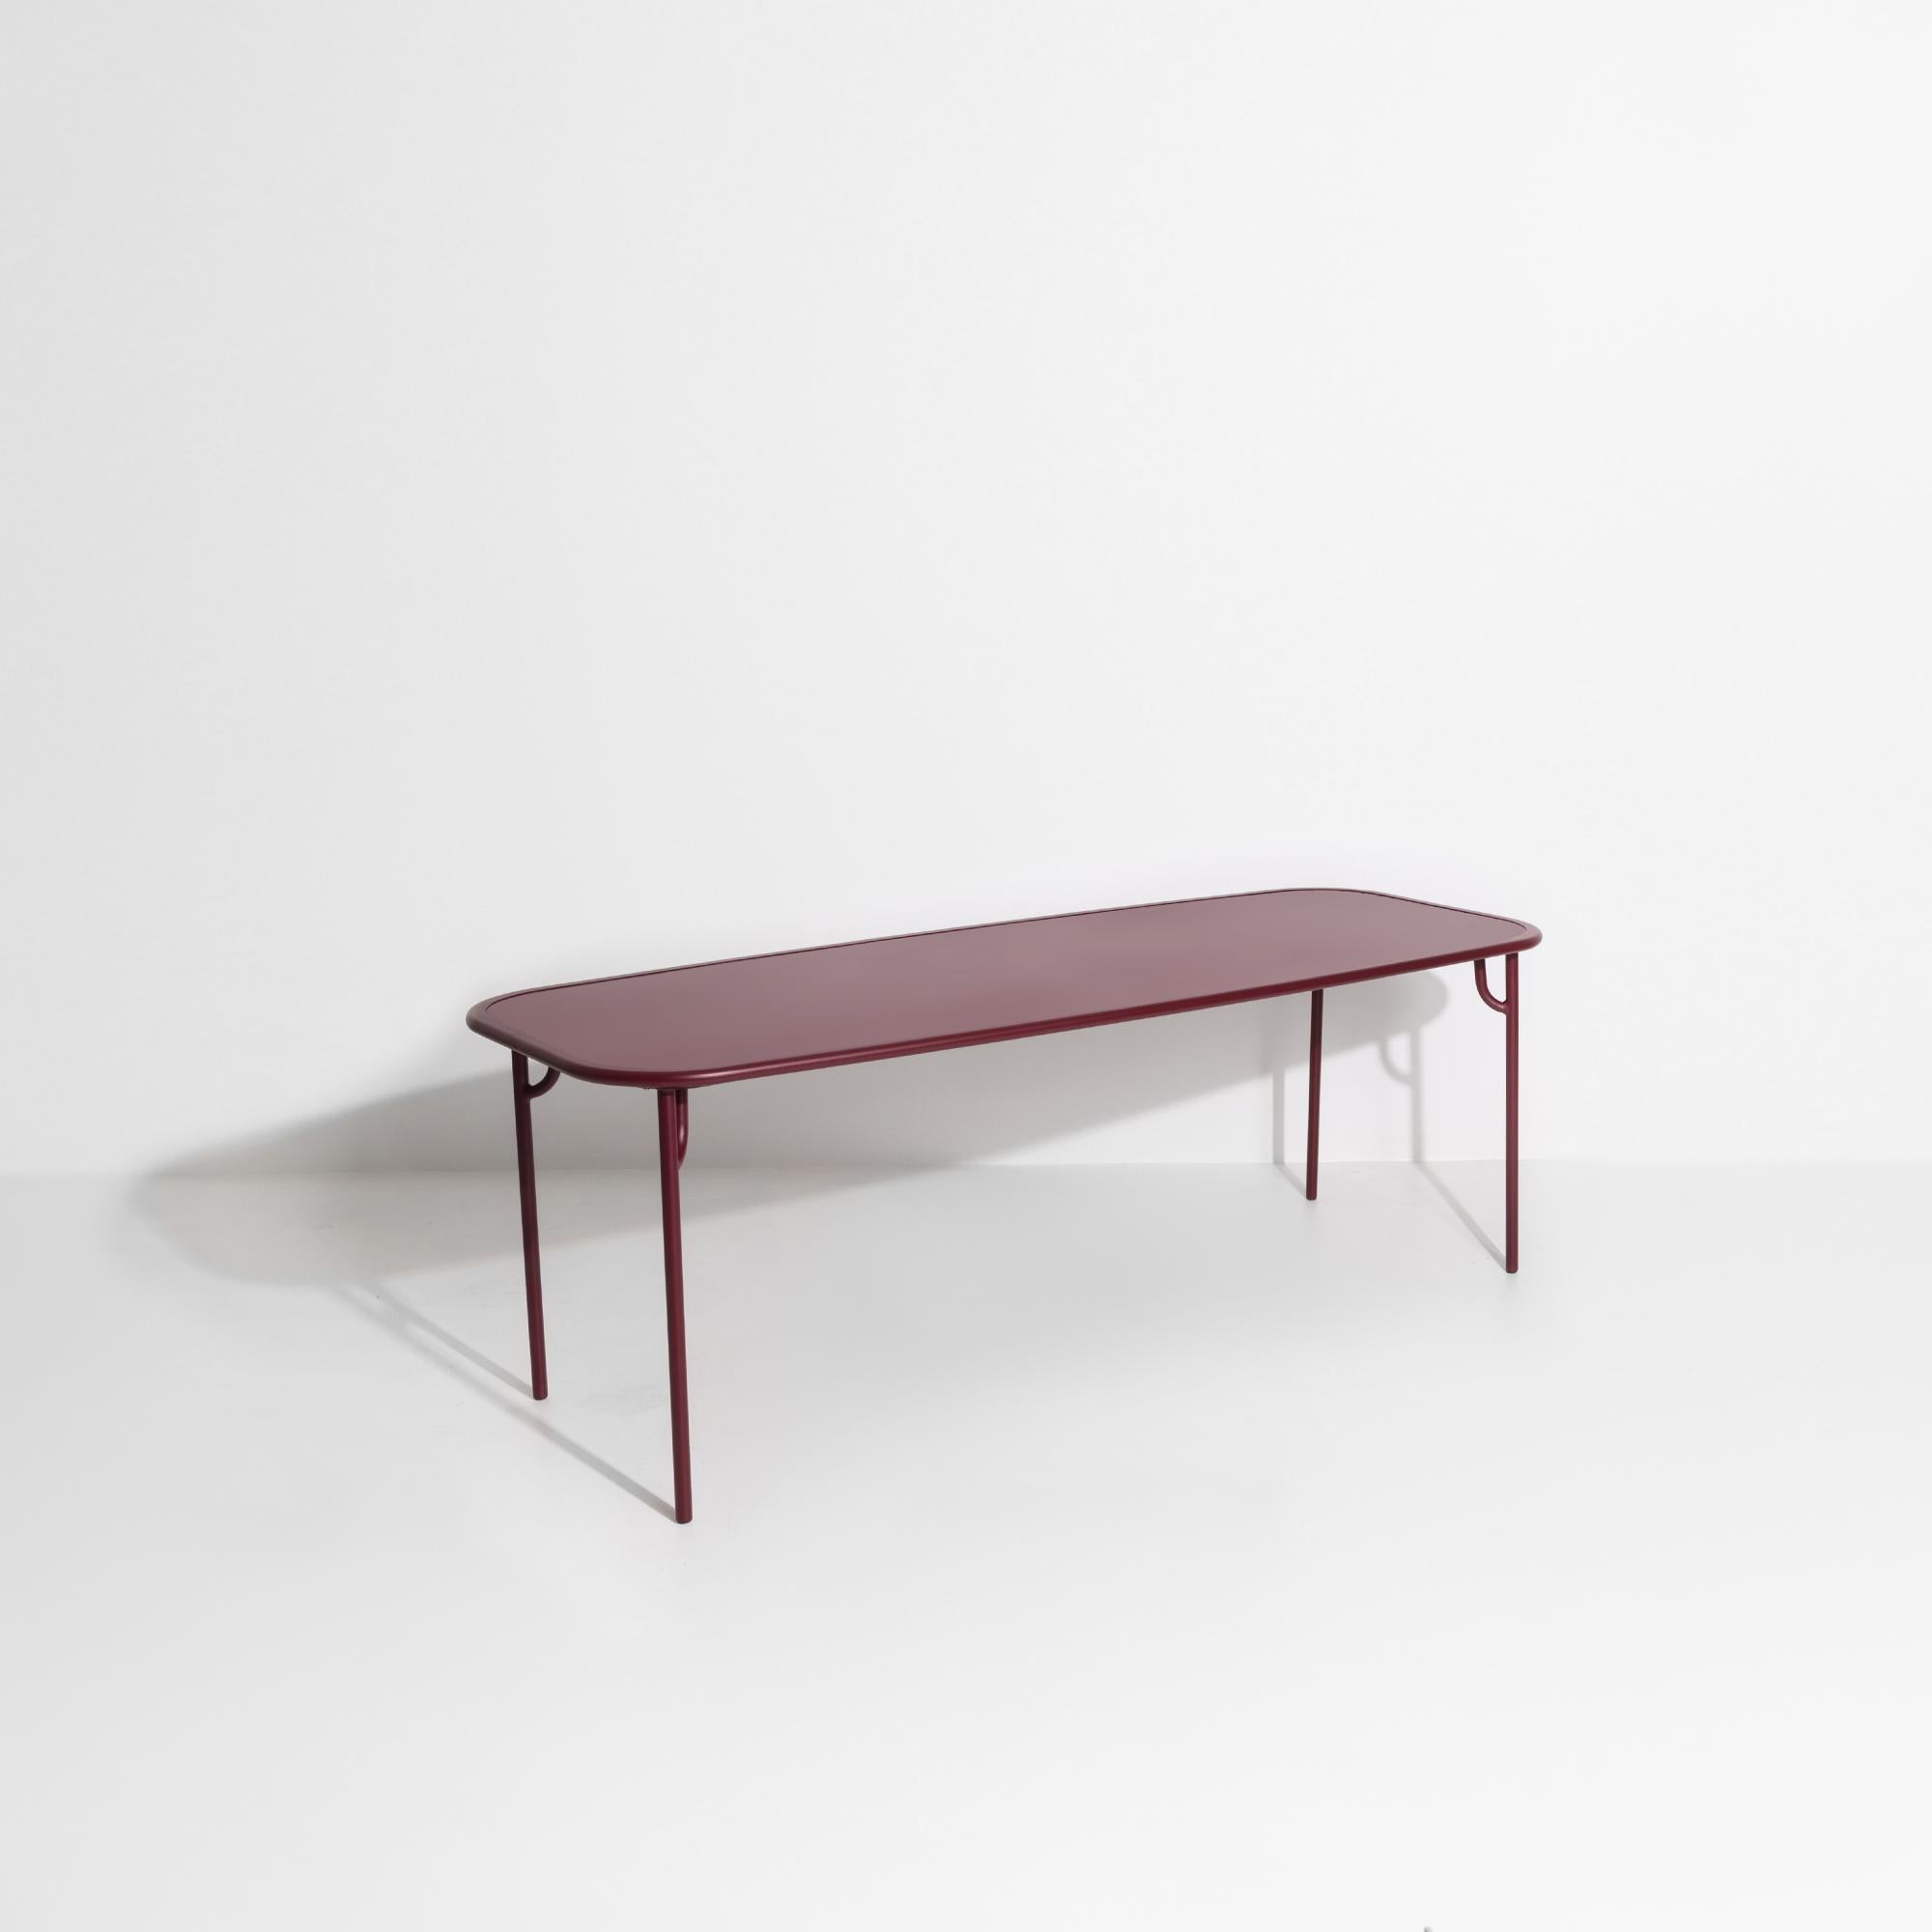 Petite Friture Week-End Large Plain Rectangular Dining Table in Burgundy Aluminium by Studio BrichetZiegler, 2017

The week-end collection is a full range of outdoor furniture, in aluminium grained epoxy paint, matt finish, that includes 18